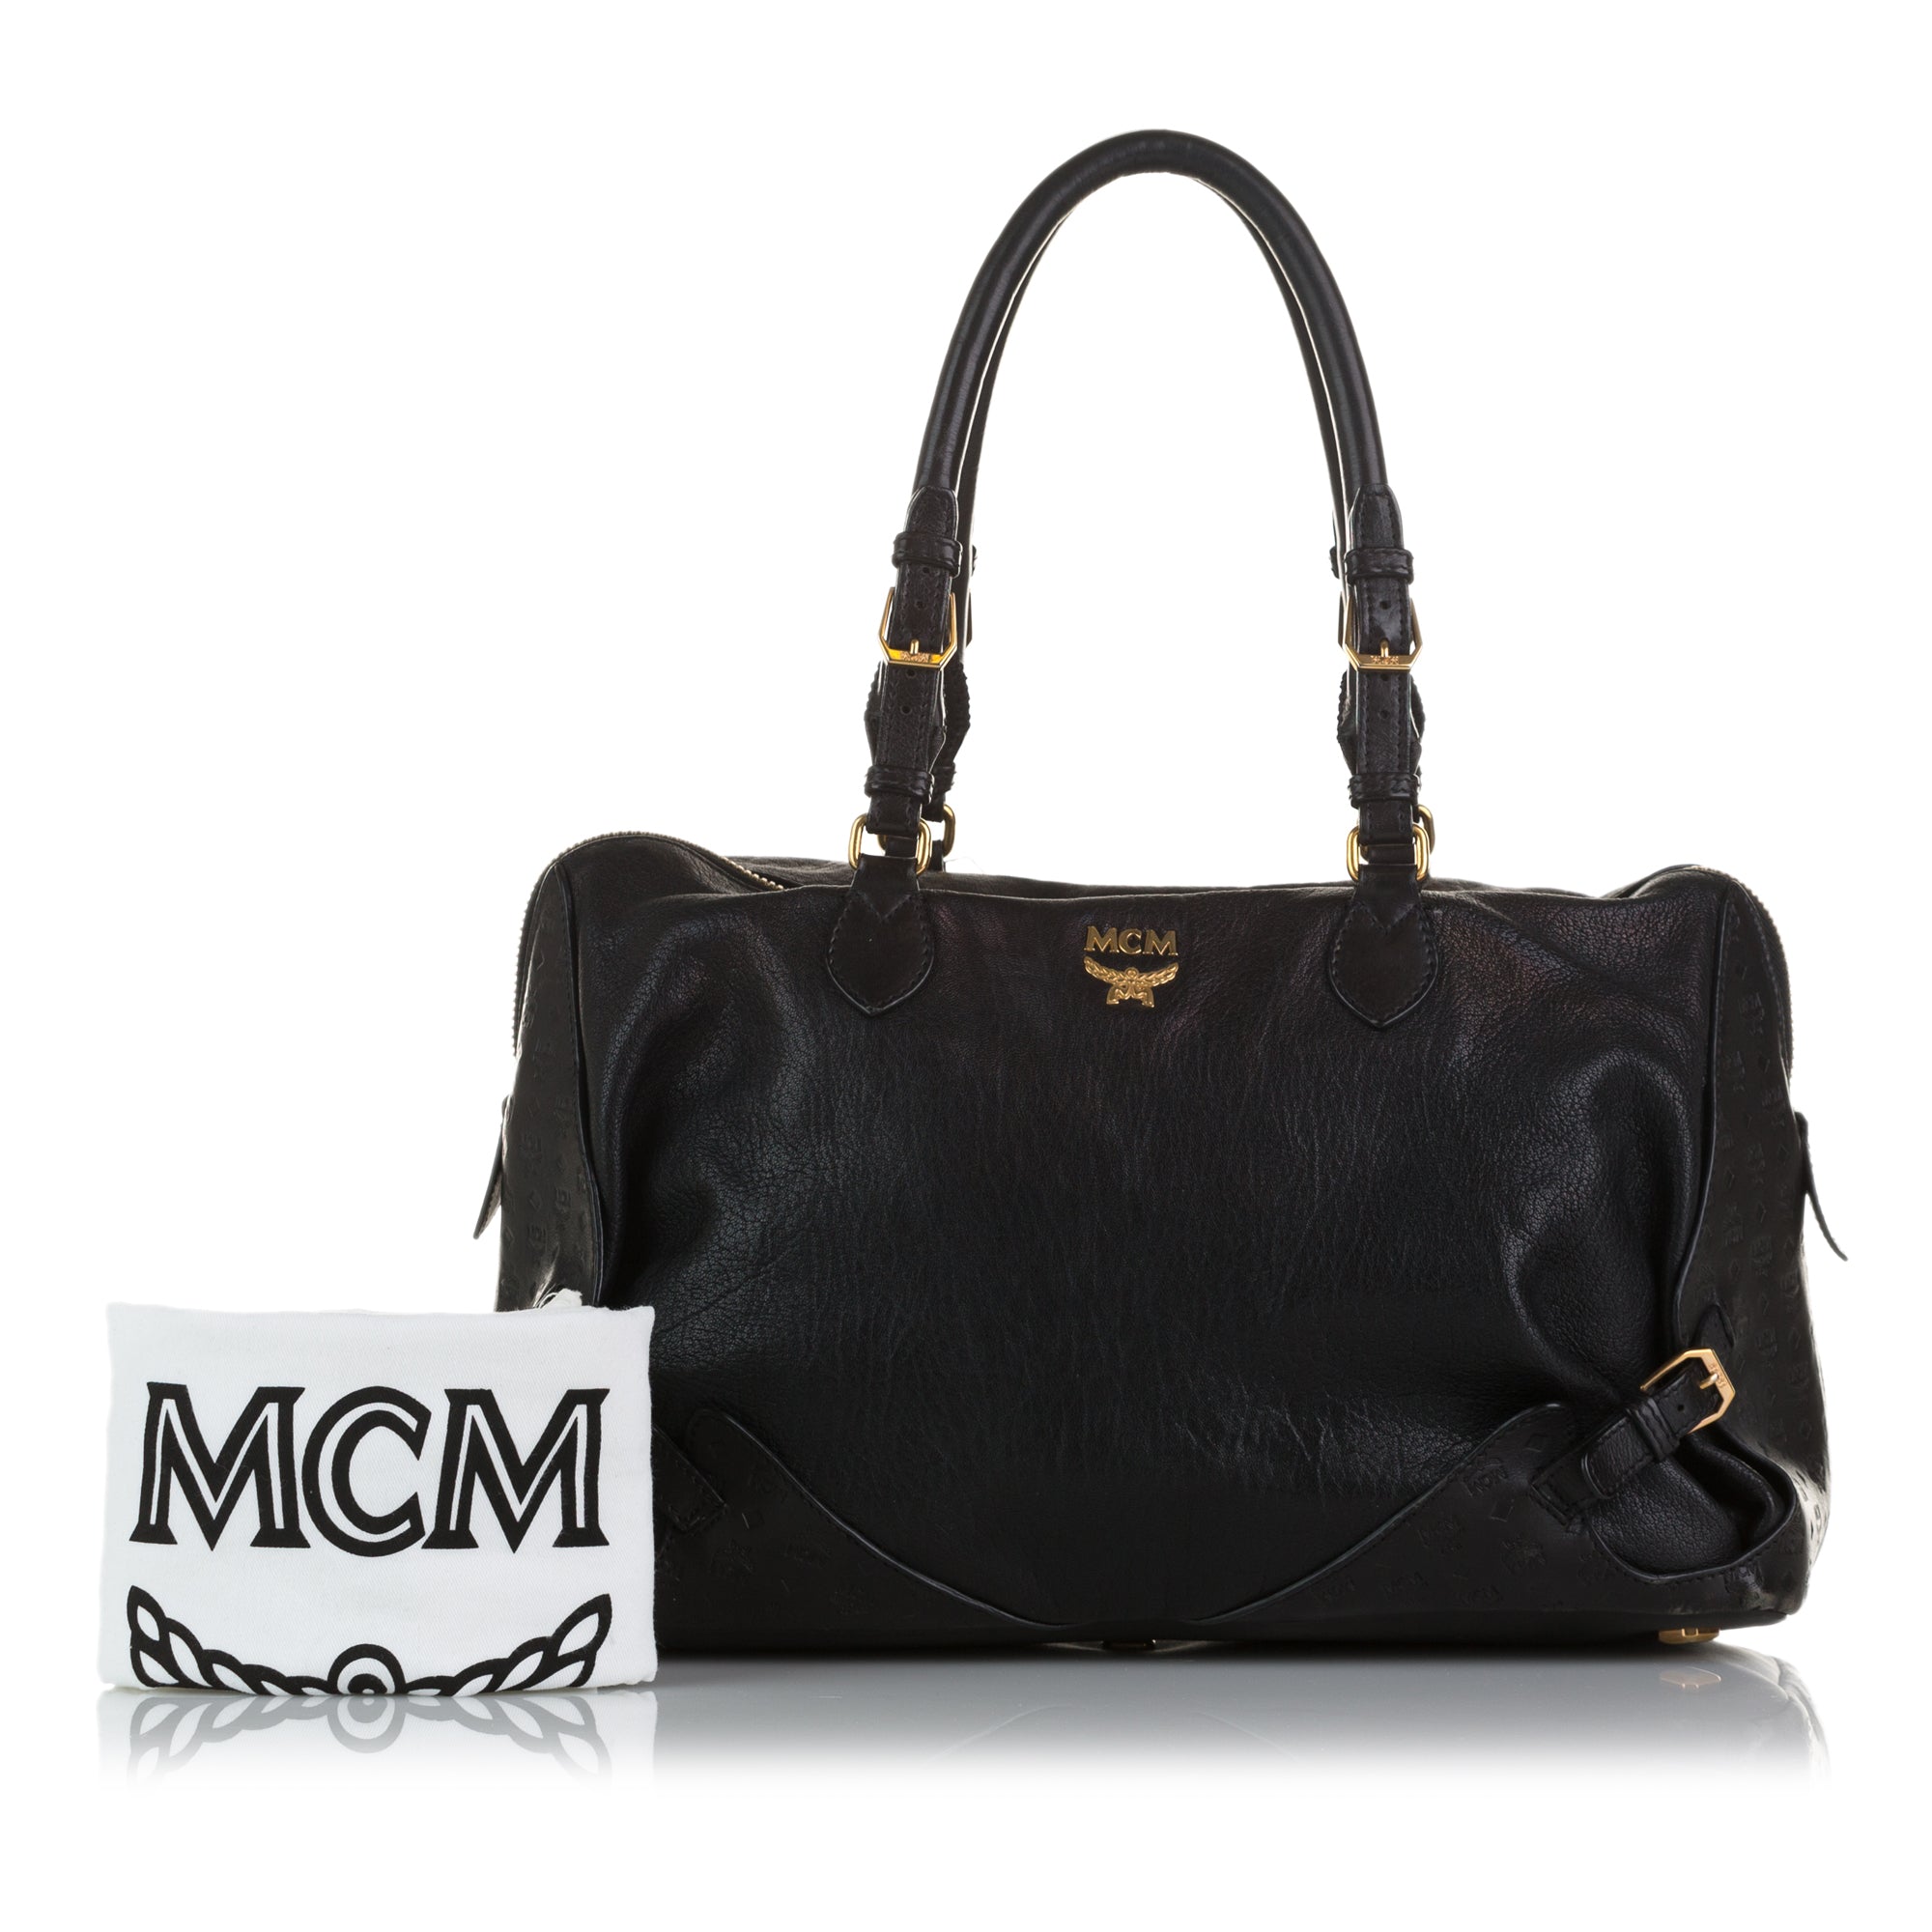 Mcm - Authenticated Handbag - Leather Black Plain for Women, Very Good Condition